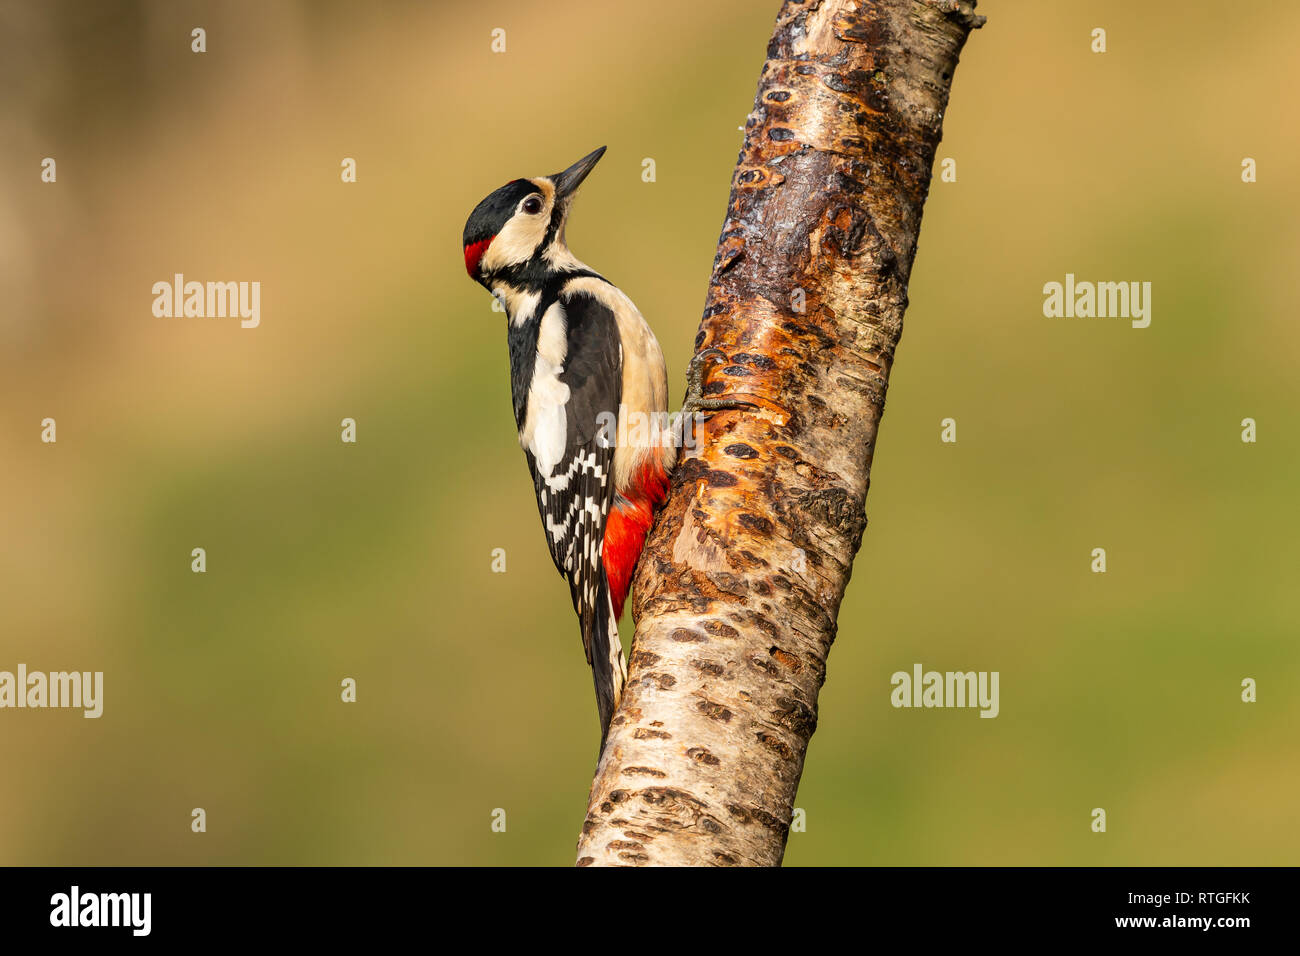 A great spotted woodpecker (Dendrocopos major) clings to the trunk of a silver birch tree Stock Photo